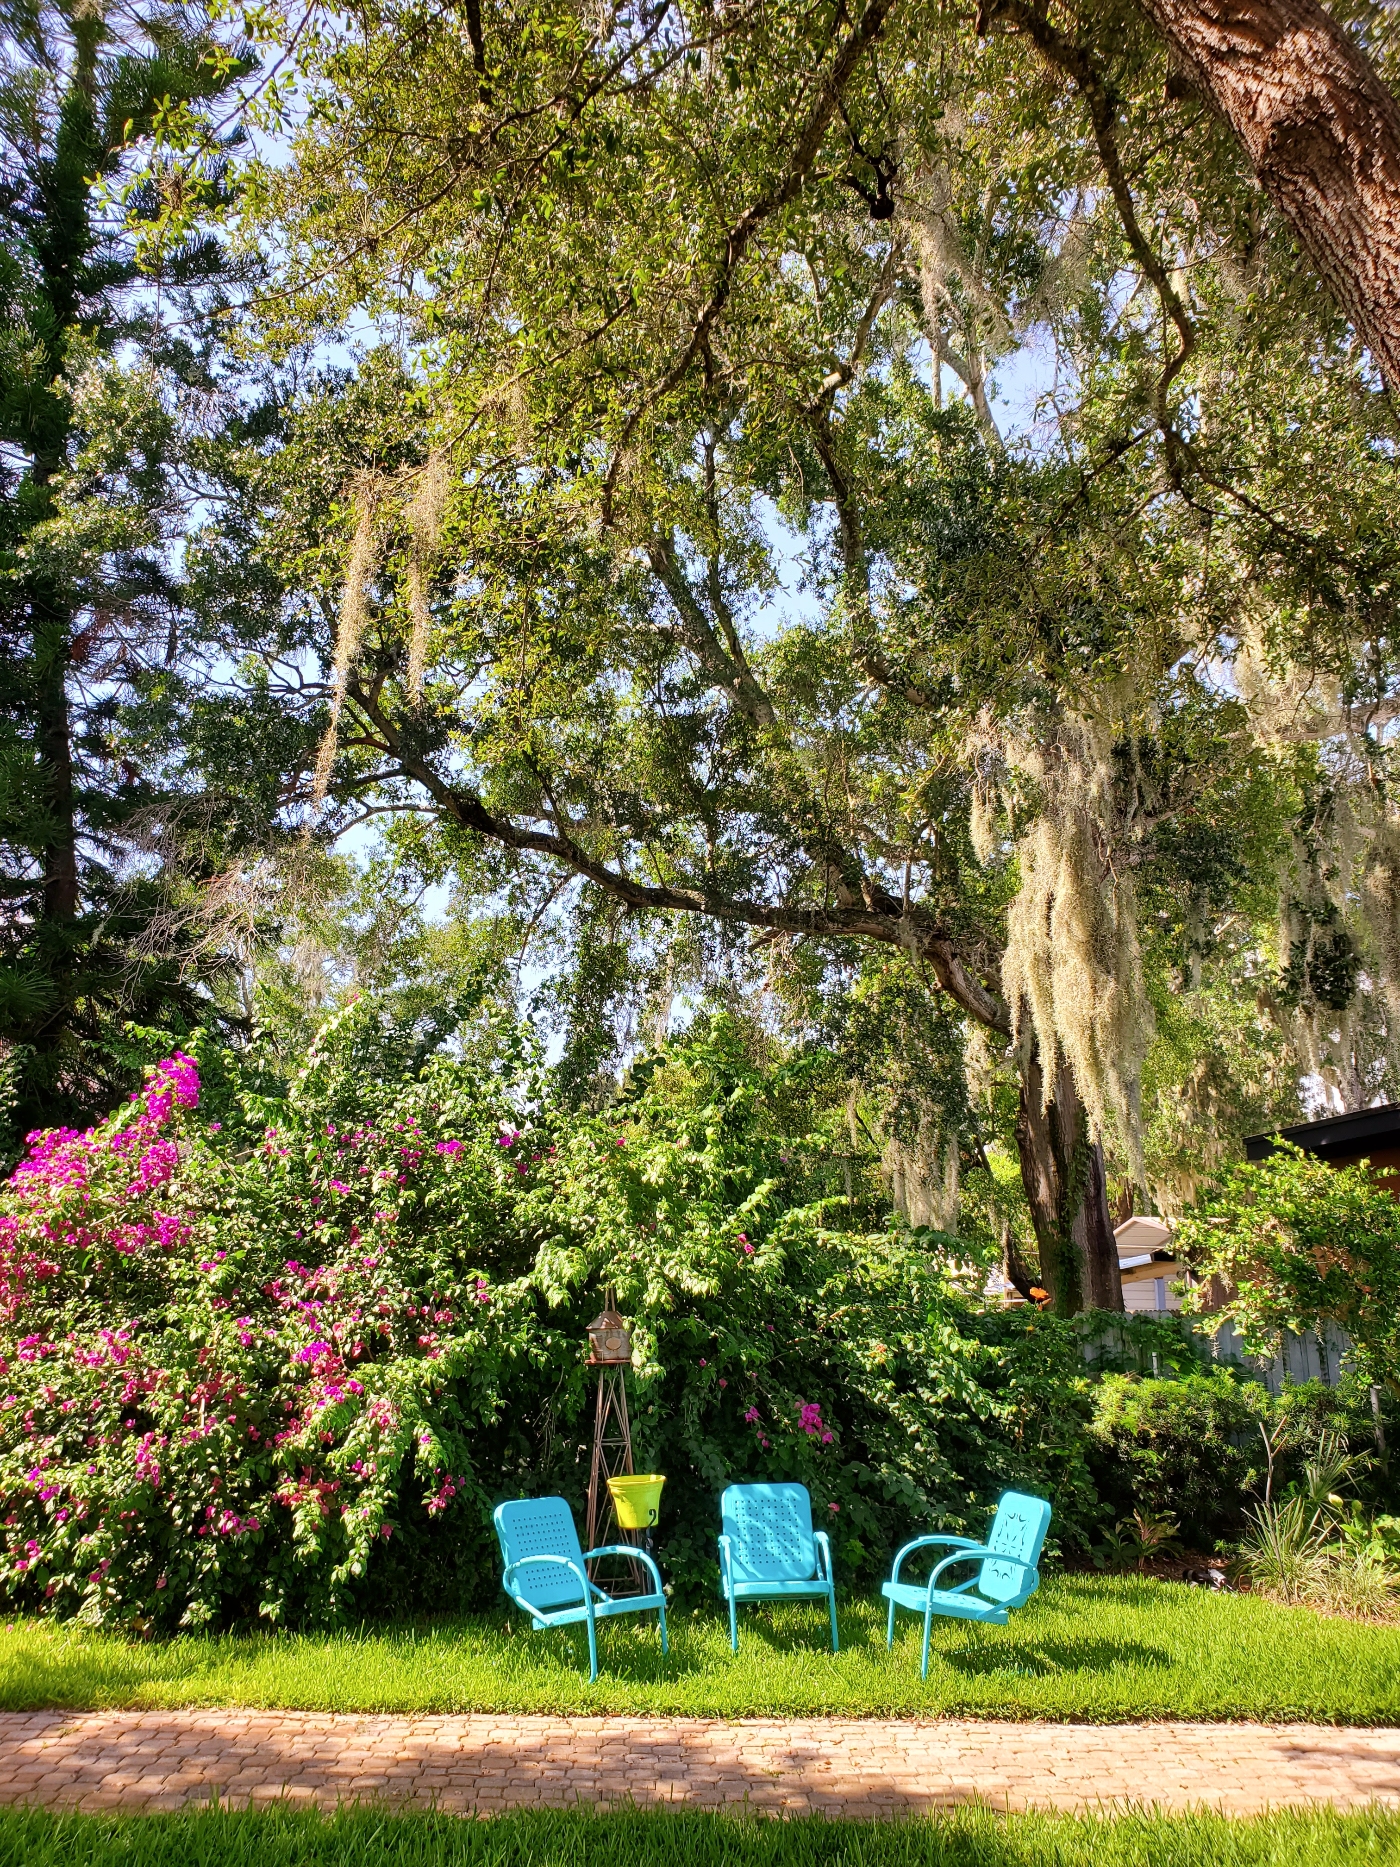 Random brightly painted metal porch chairs beckon to passersby to sit awhile, downtown Ocoee